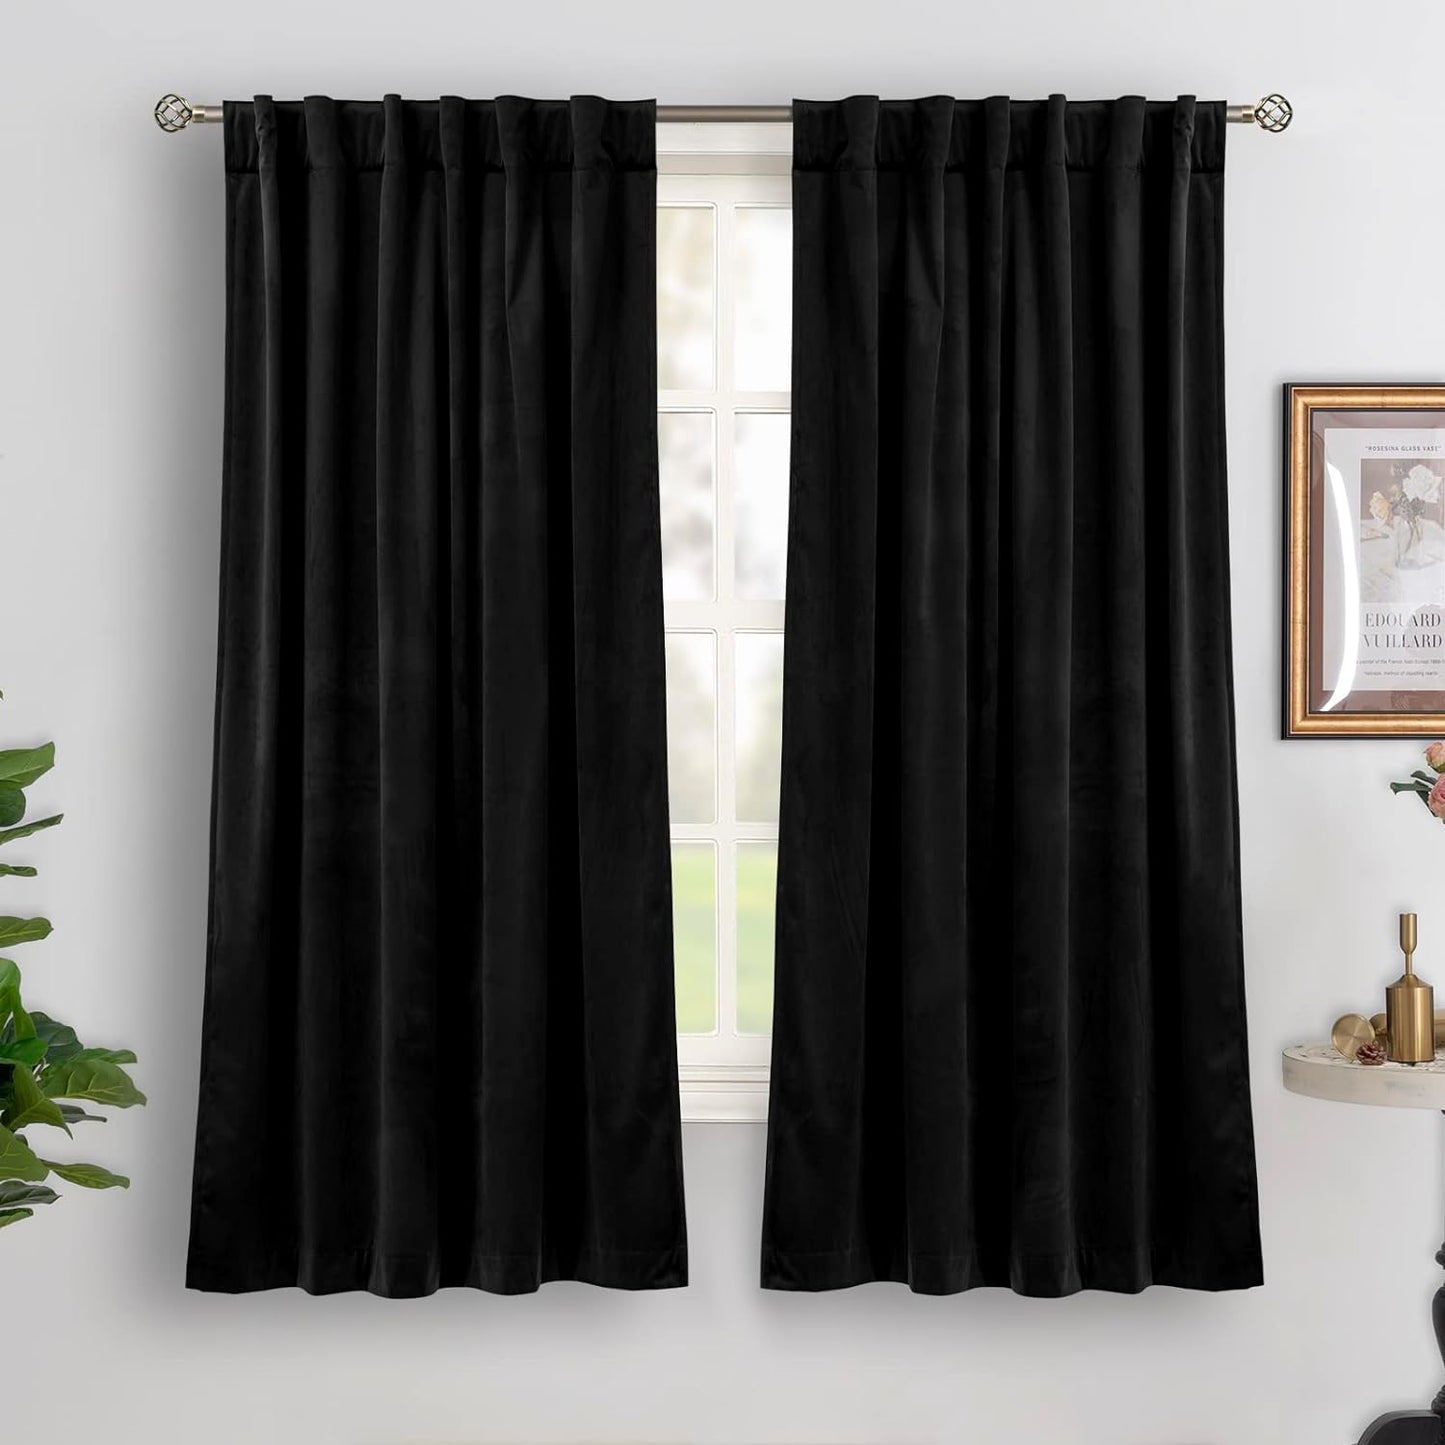 Bgment Grey Velvet Curtains 108 Inches Long for Living Room, Thermal Insulated Room Darkening Curtains Drapes Window Treatment with Back Tab and Rod Pocket, Set of 2 Panels, 52 X 108 Inch  BGment Black 52W X 63L 